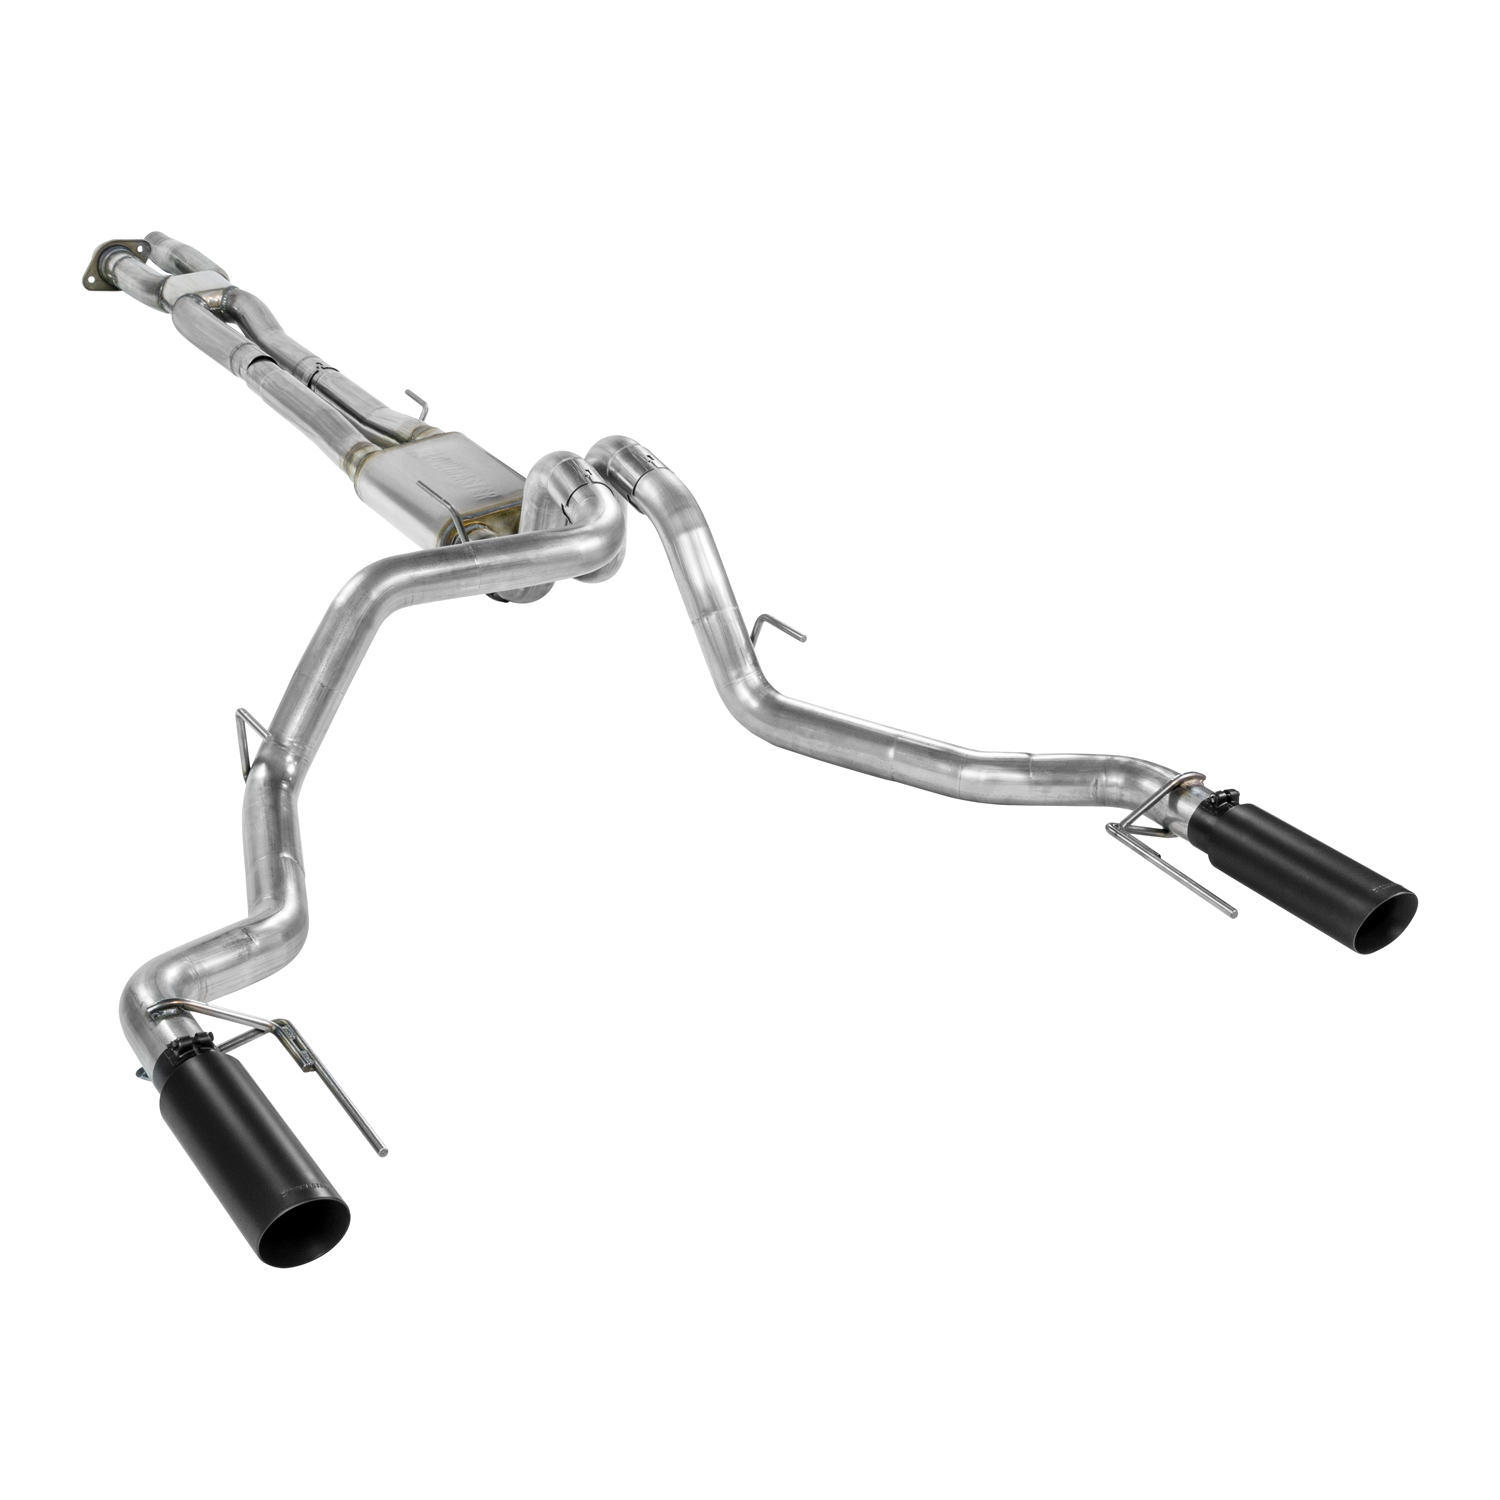 2017-2018 Ford F-150 Raptor 3.5L EcoBoost Cat-back 409S Stainless Steel Exhaust System